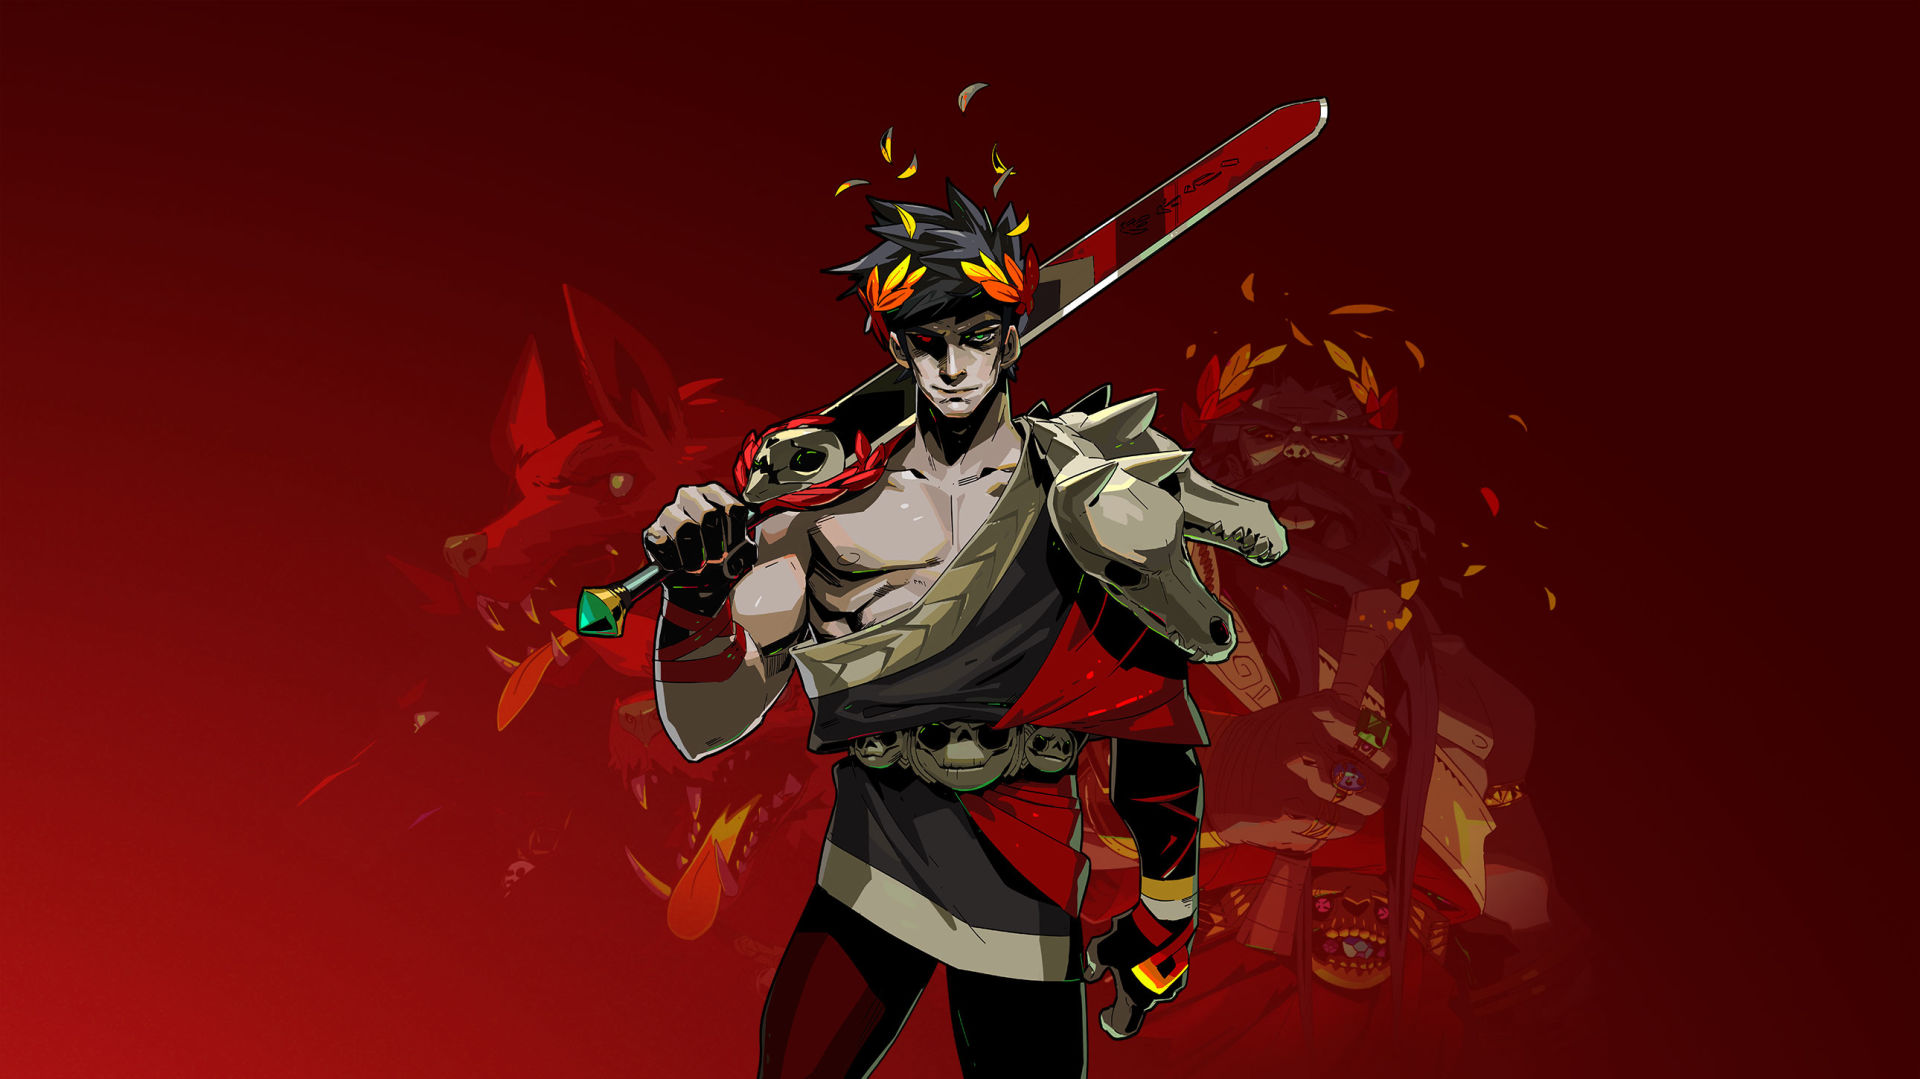 Artwork for Hades with a muscular man in ancient Greek clothing wit a crown of red, yellow, and orange laurels and a massive red sword hanging over his right shoulder.